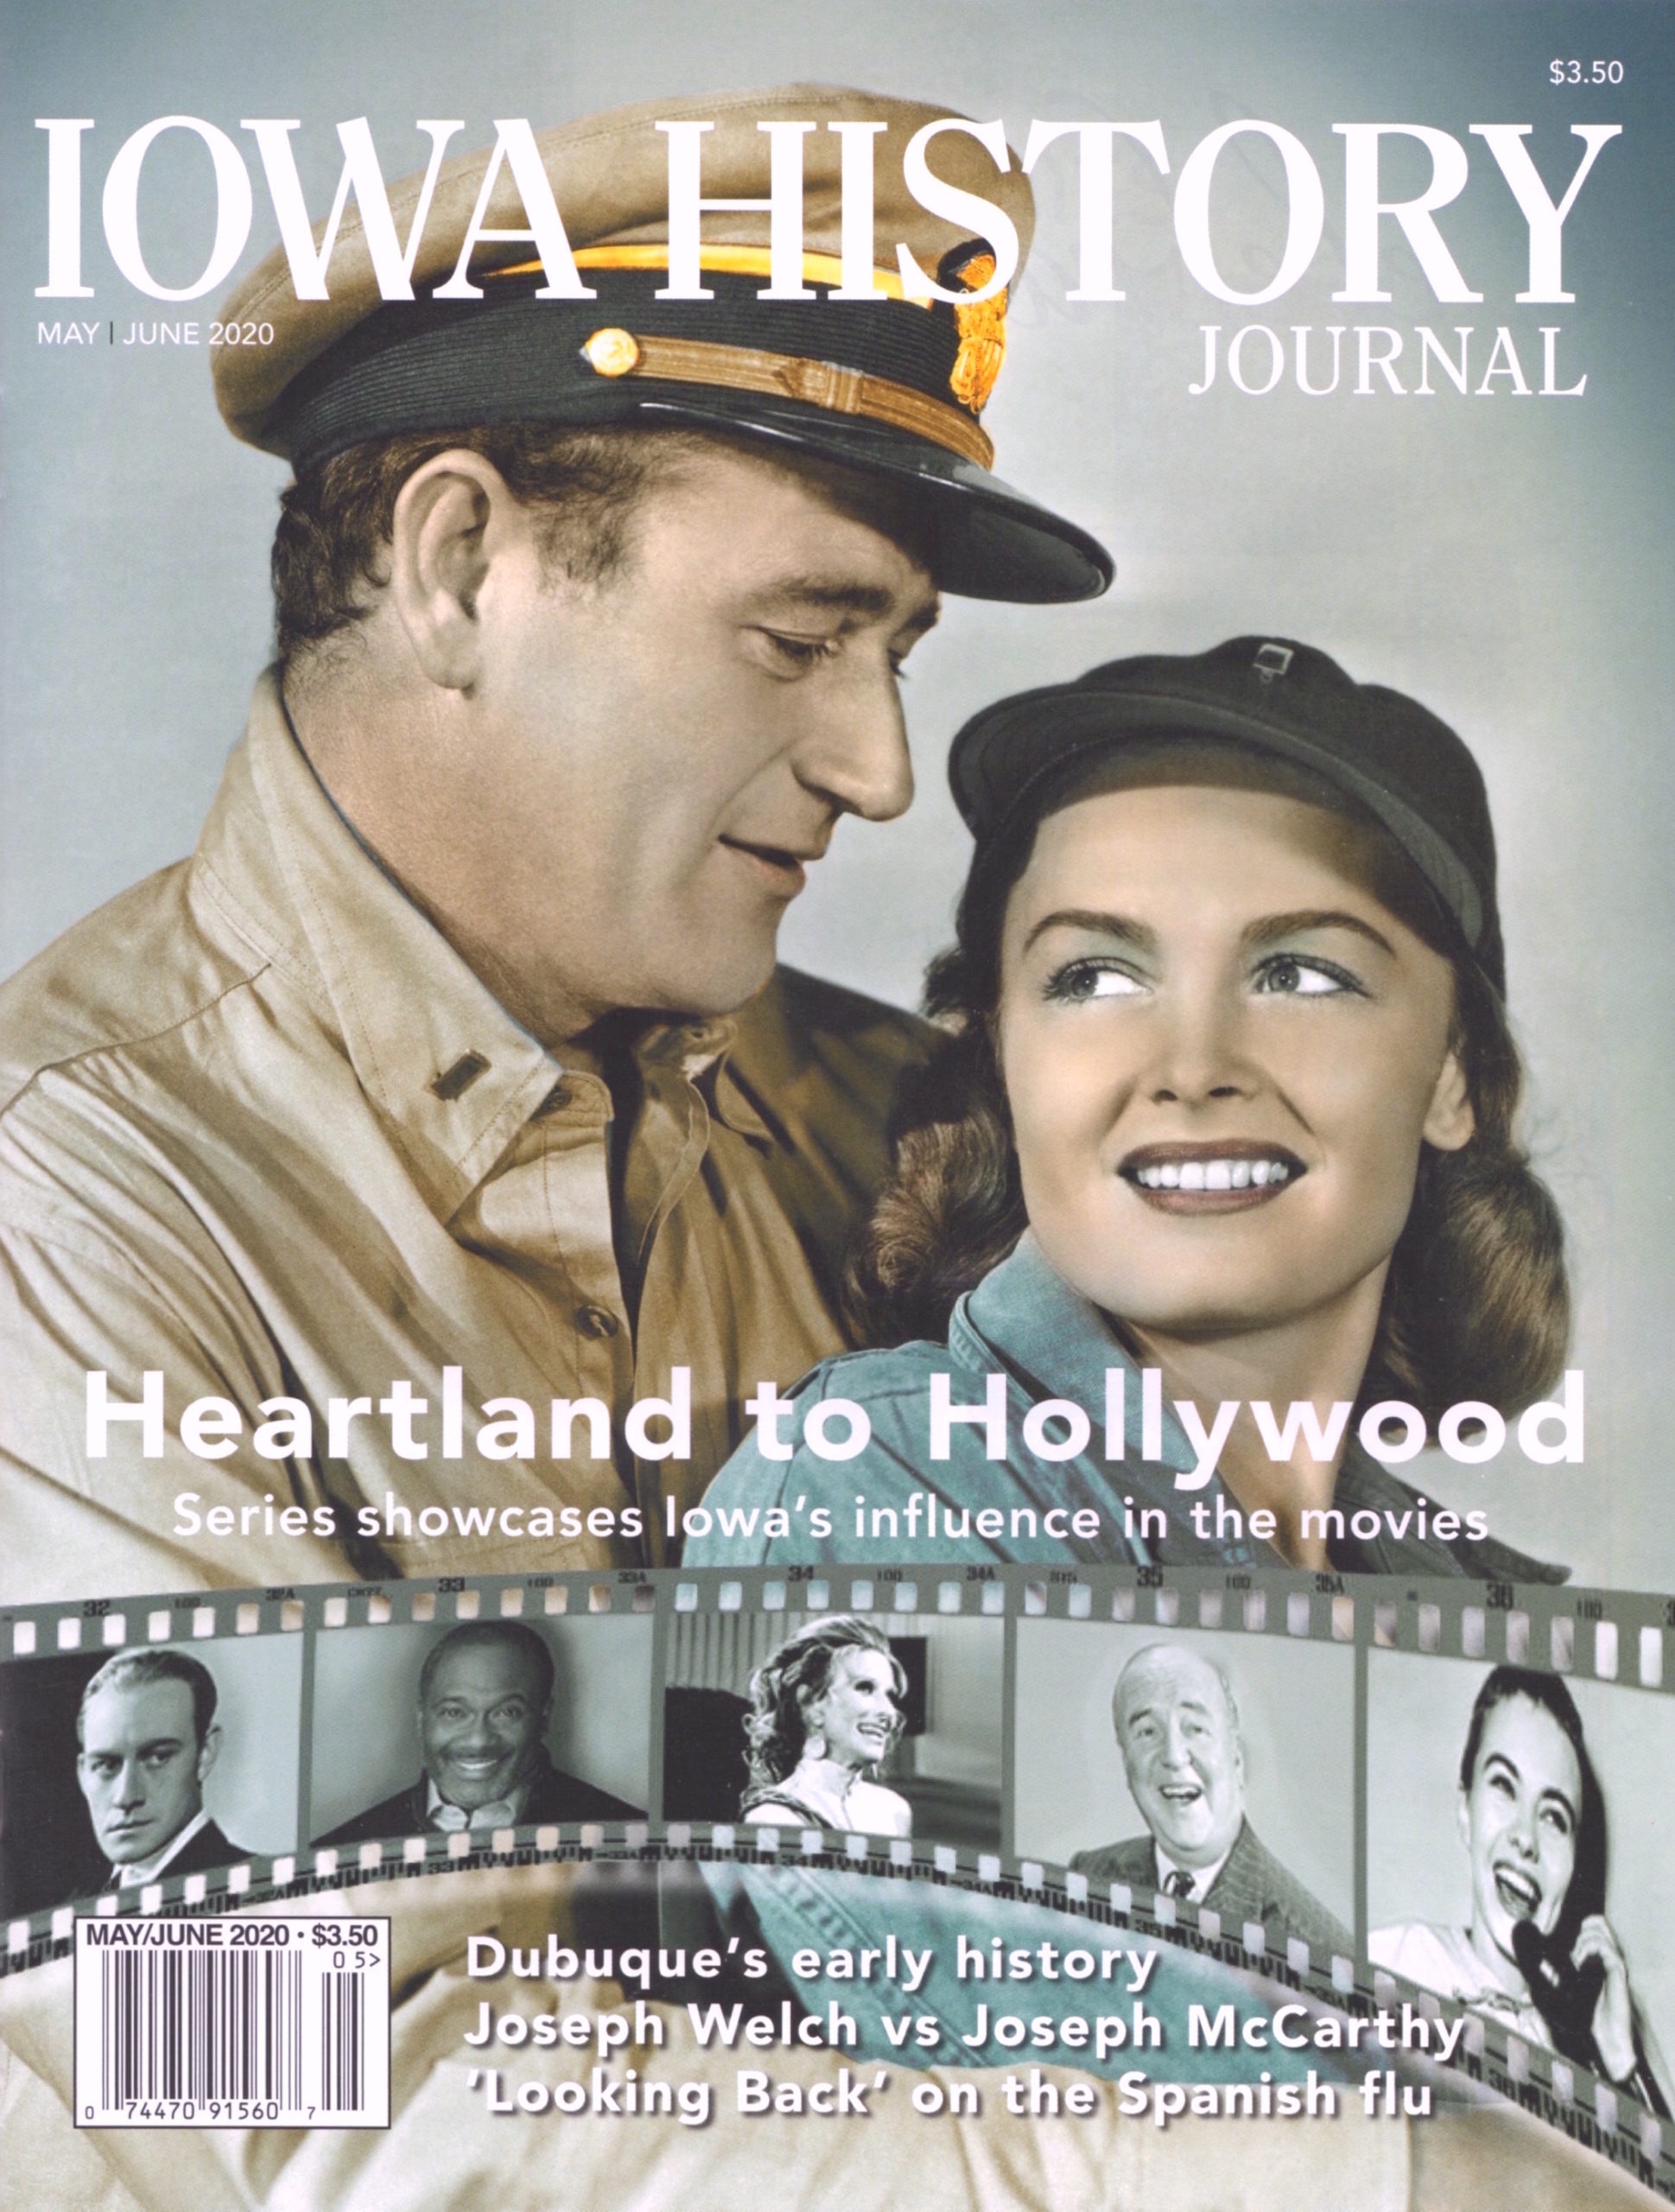 Volume 12, Issue 3 - Heartland to Hollywood